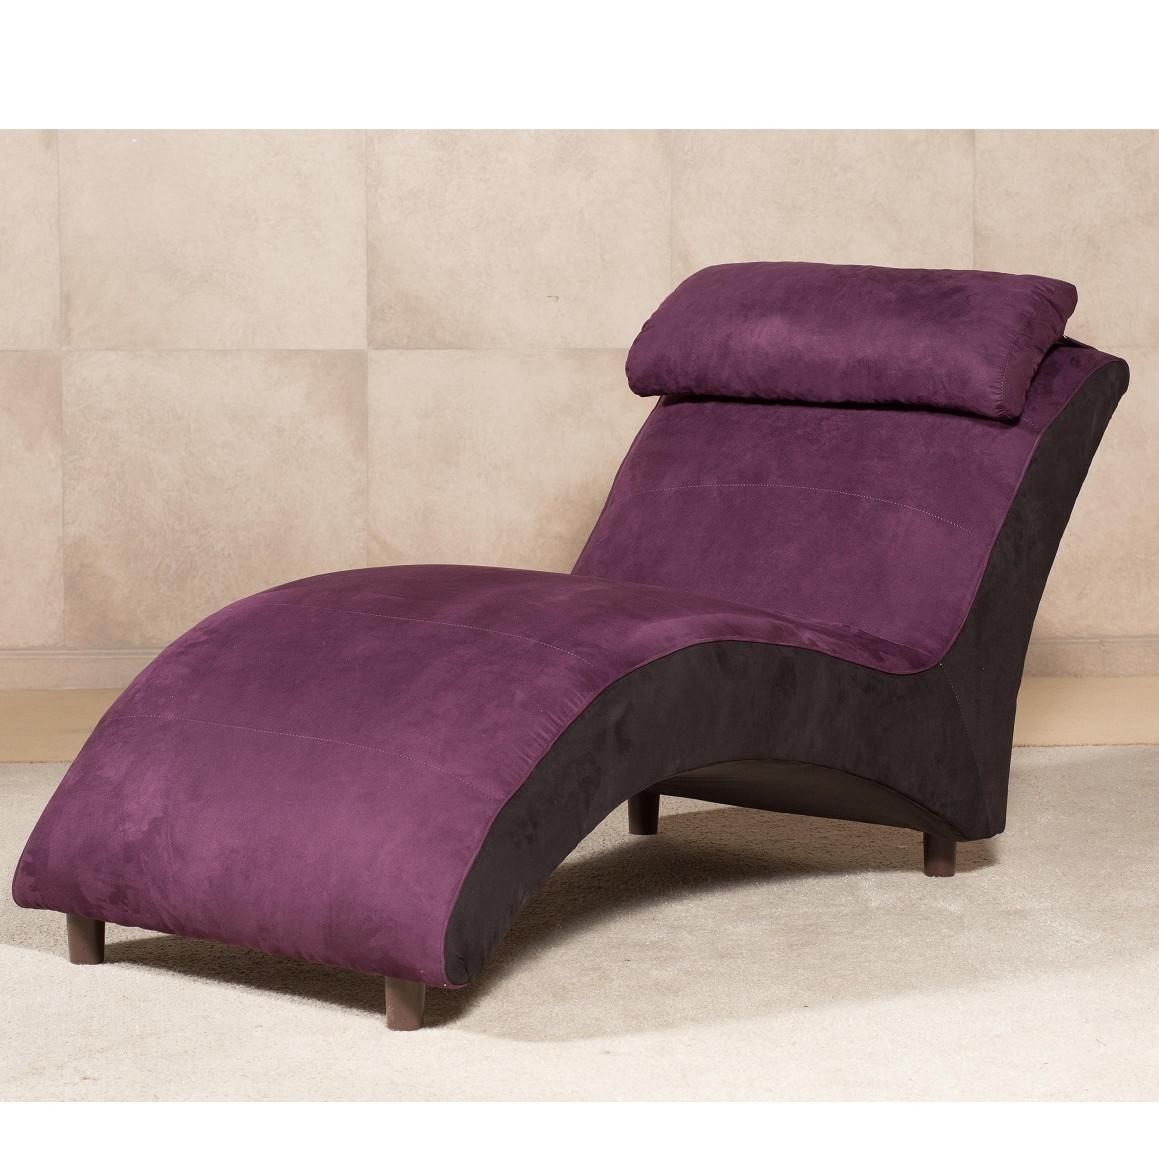 Furniture: Cute Purple Chaise Lounge For Living Room Furniture Inside Sofa Lounge Chairs (View 20 of 20)